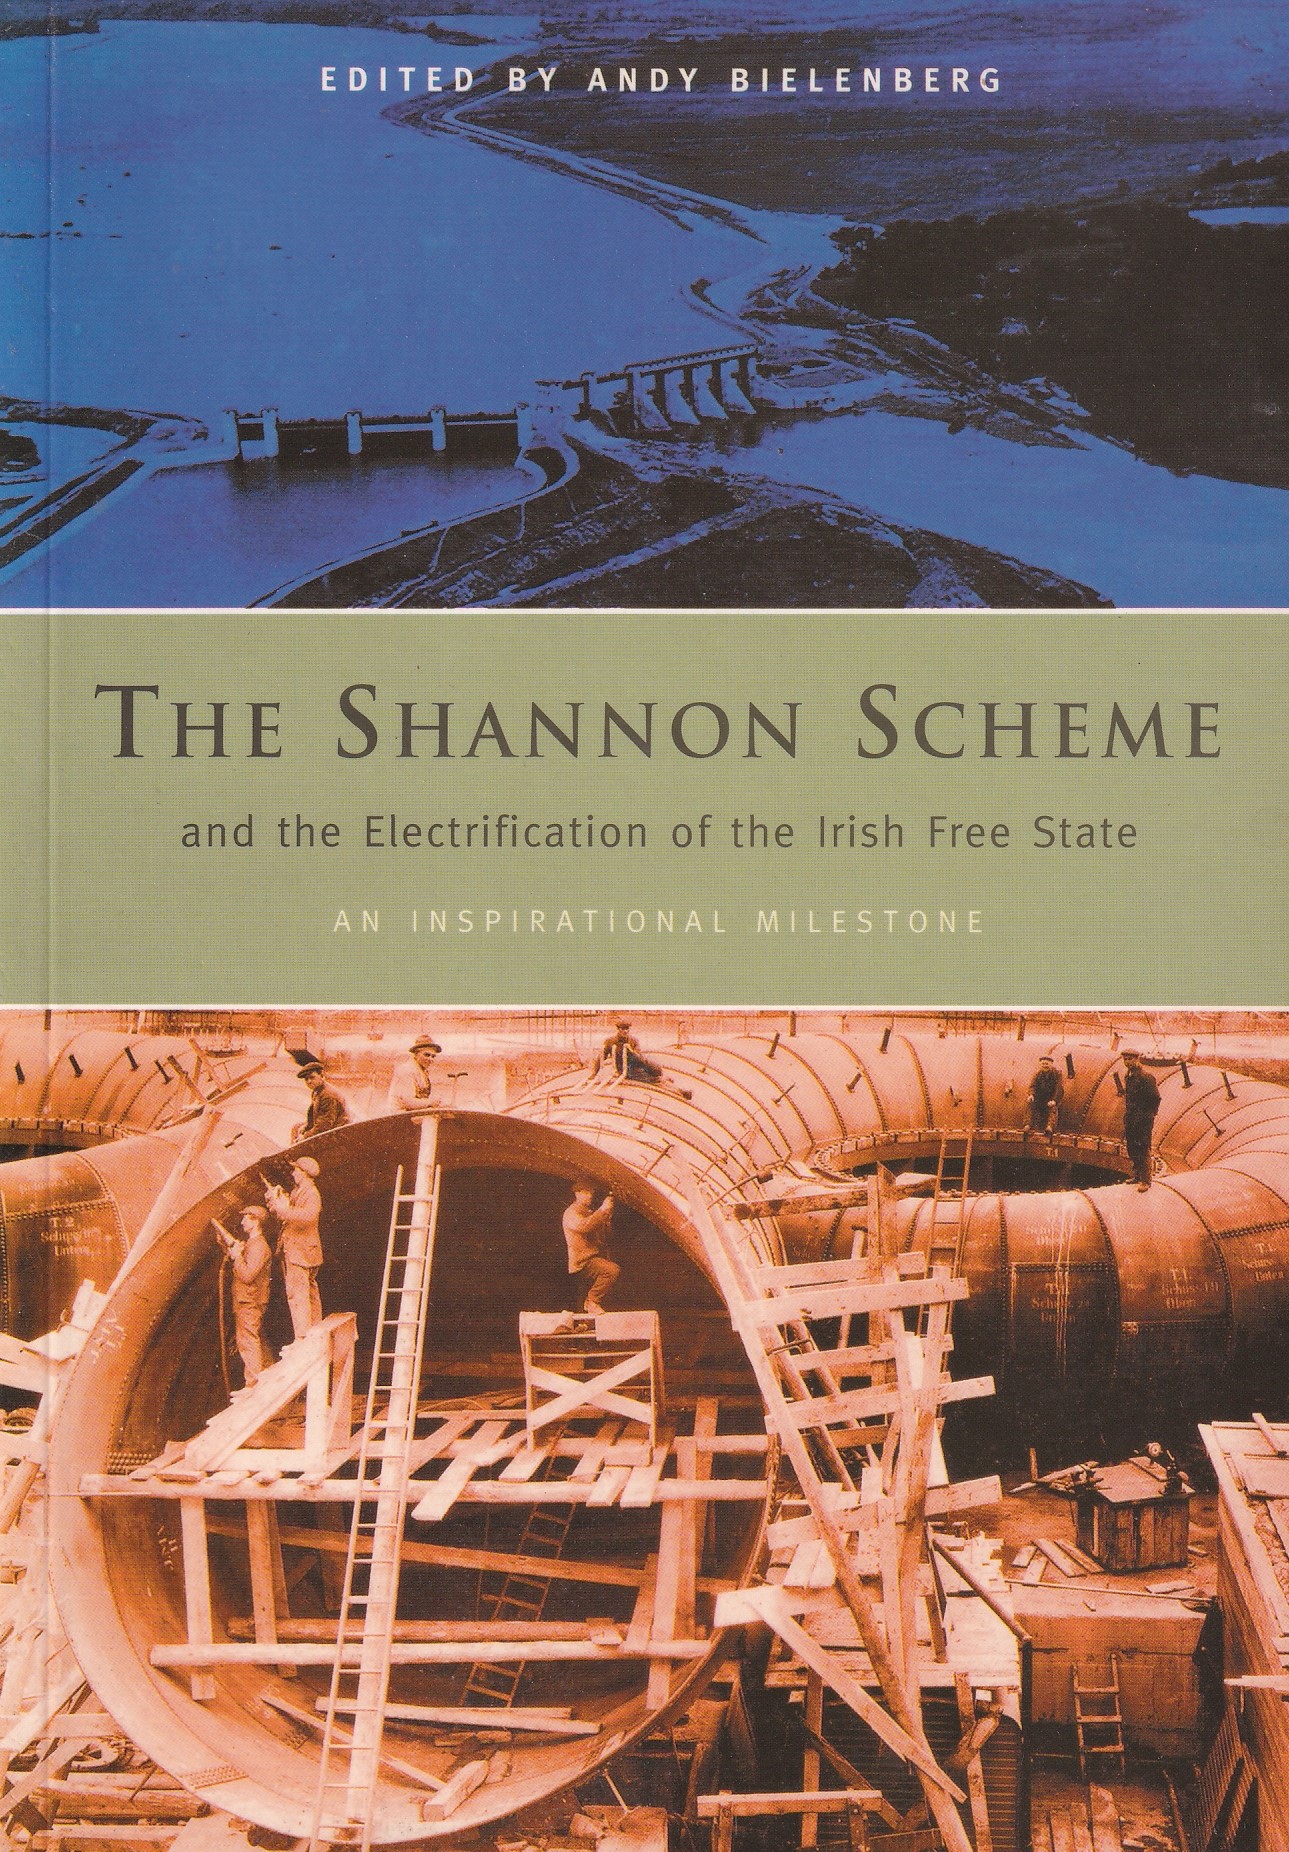 The Shannon Scheme and the Electrification of the Irish Free State | Bielenberg, Andy | Charlie Byrne's